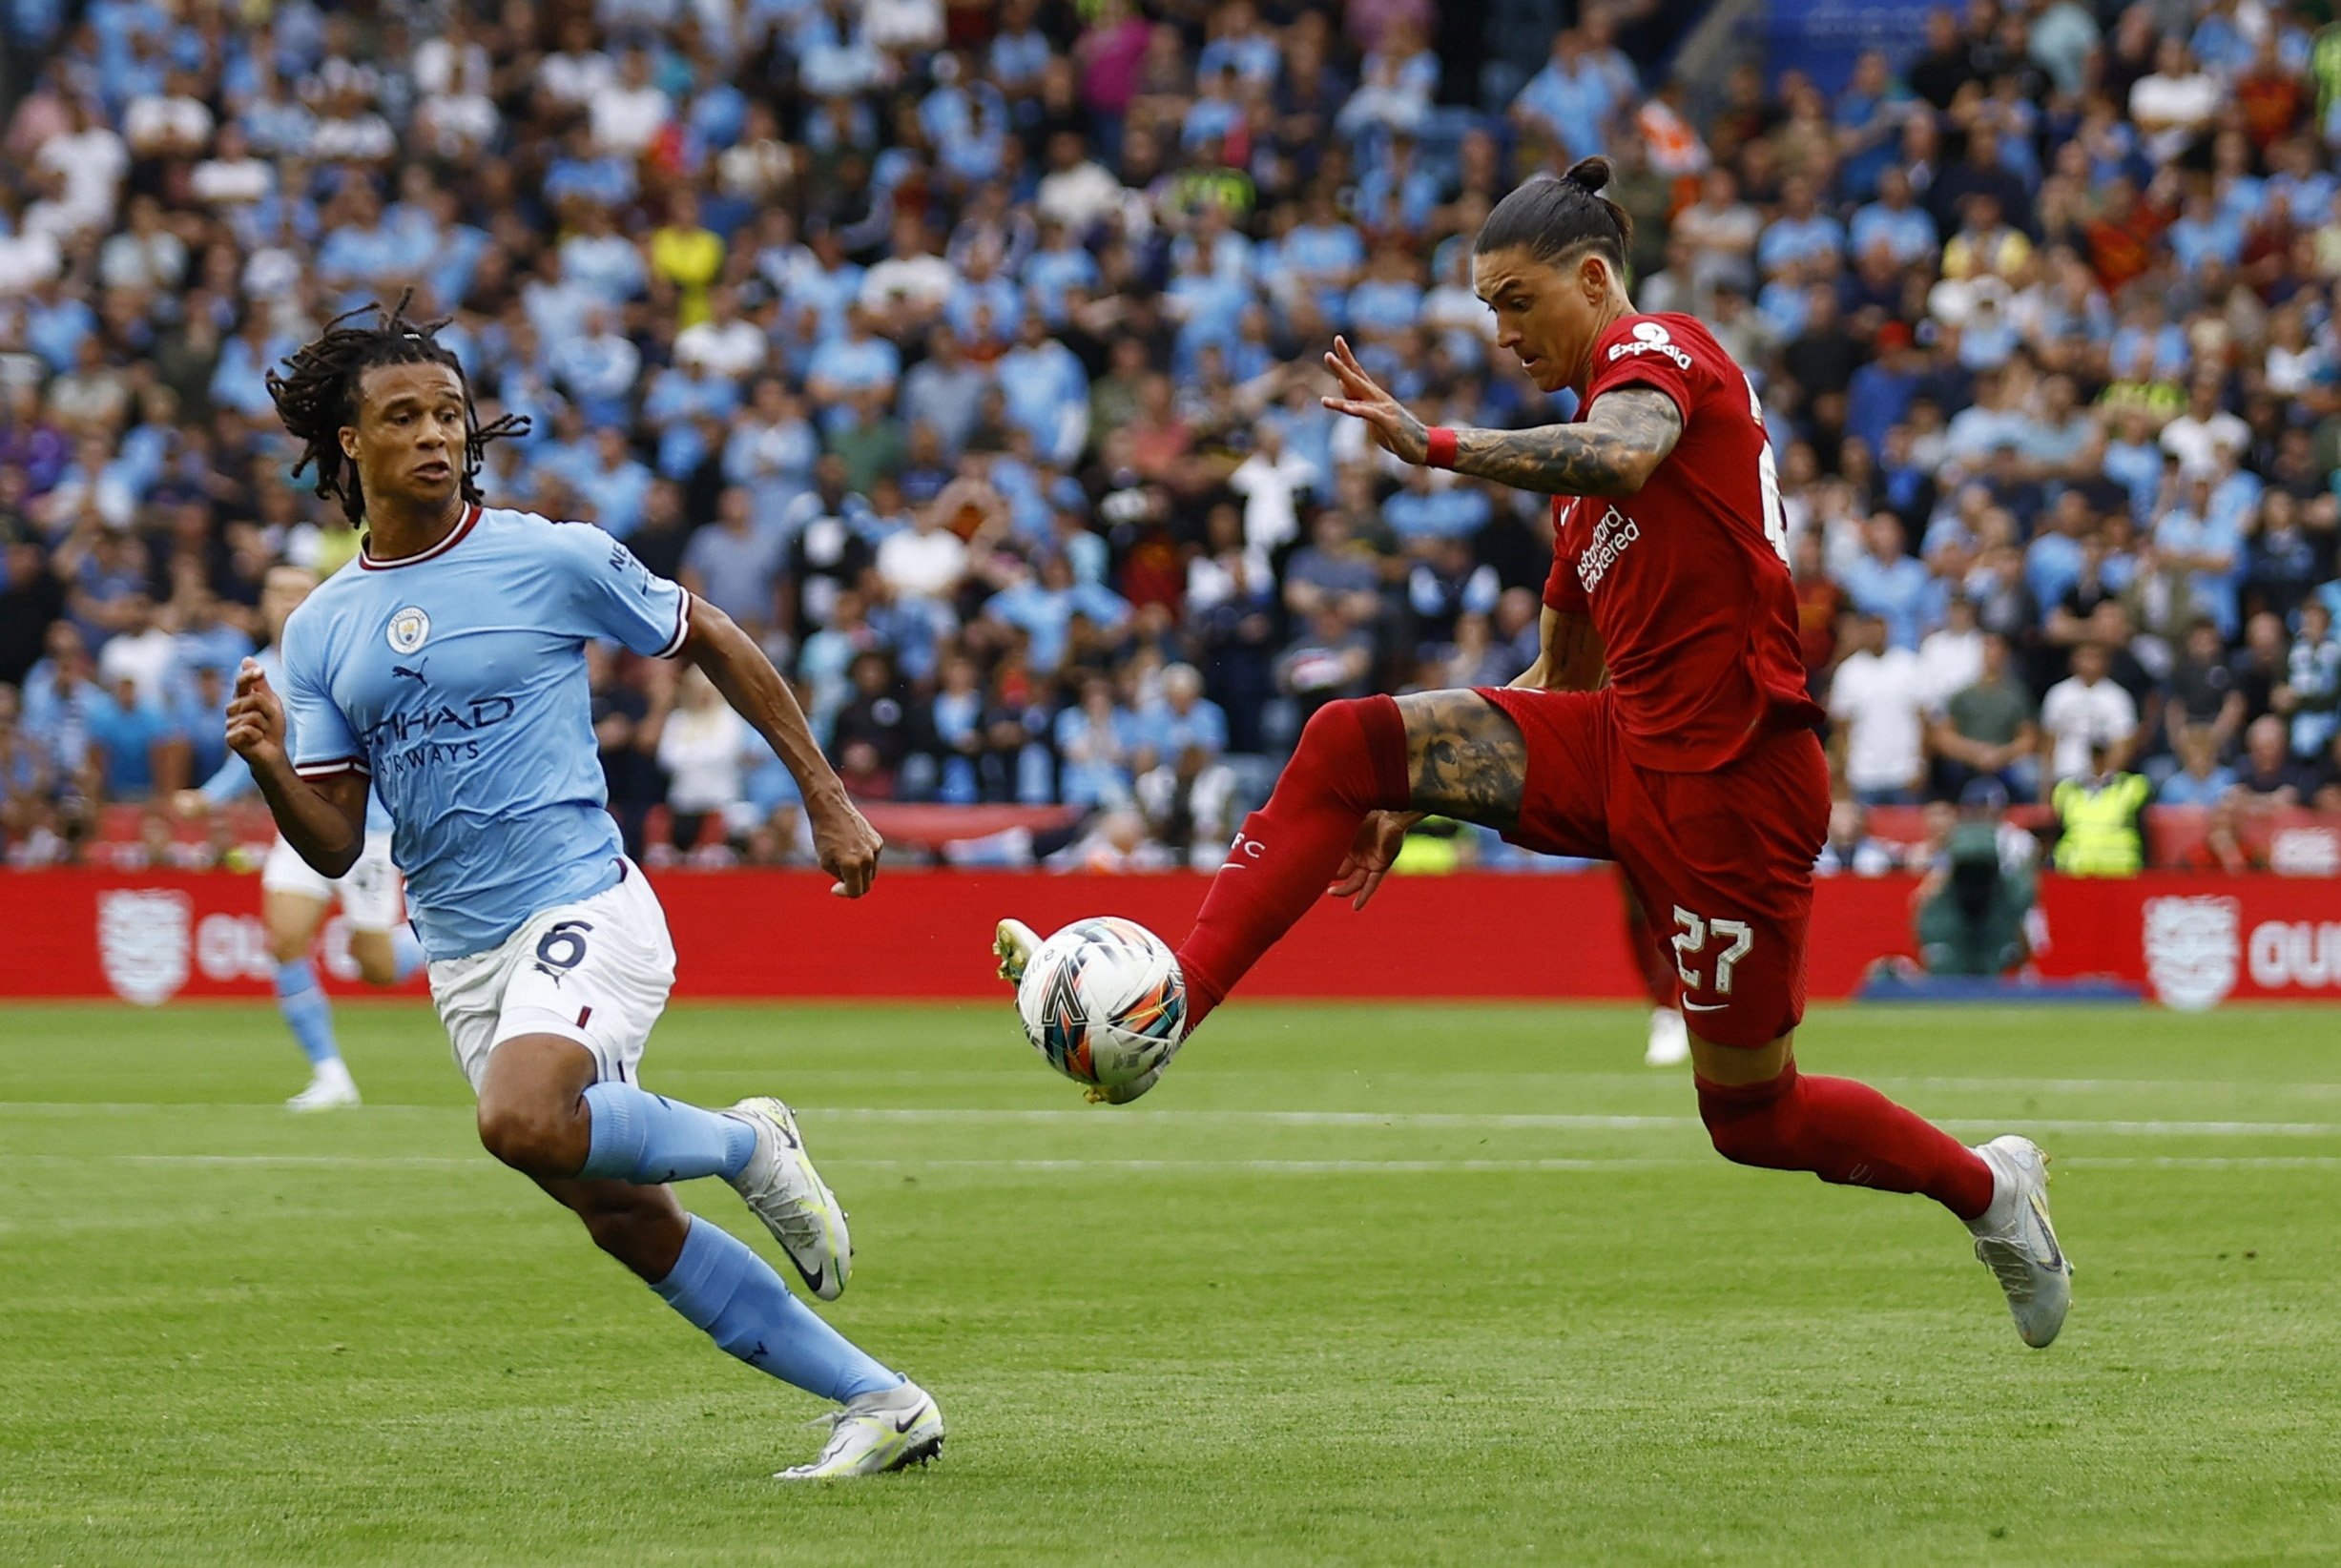 Anfield Drama: Liverpool and Manchester City's Stalemate Paints Premier League Picture